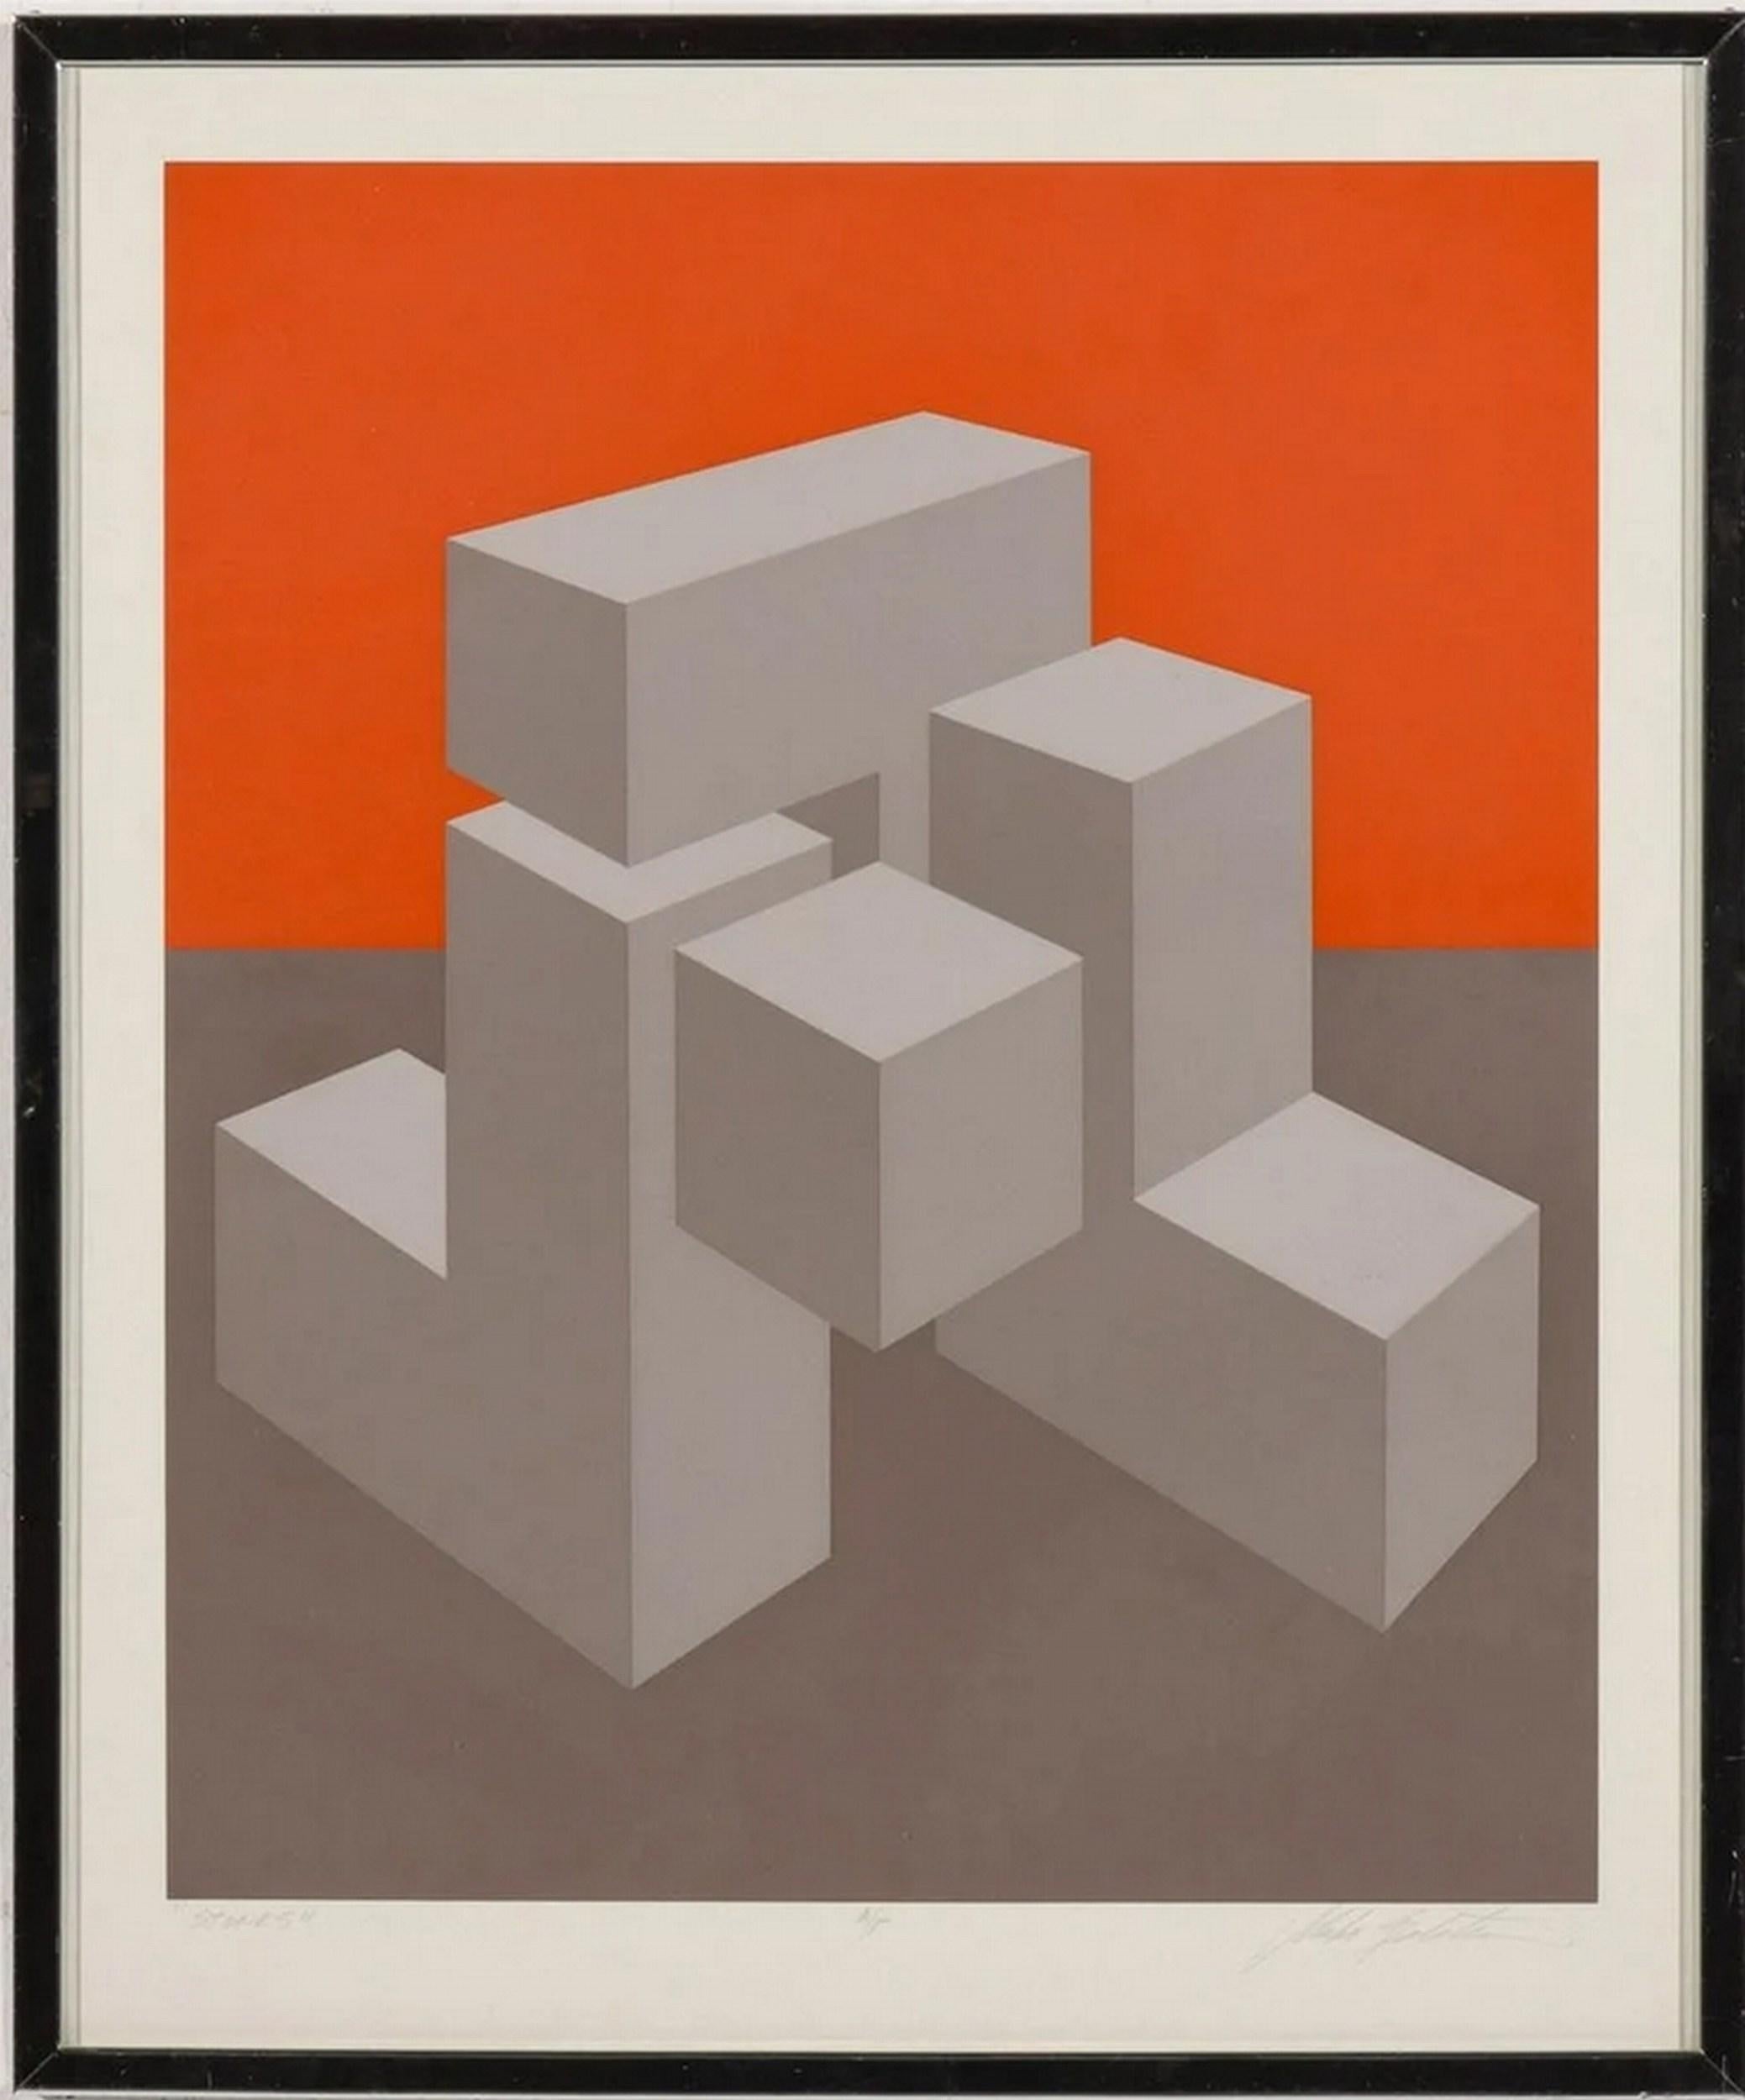 Stones (Abstract Geometric Composition) - Print by Marko Spalatin